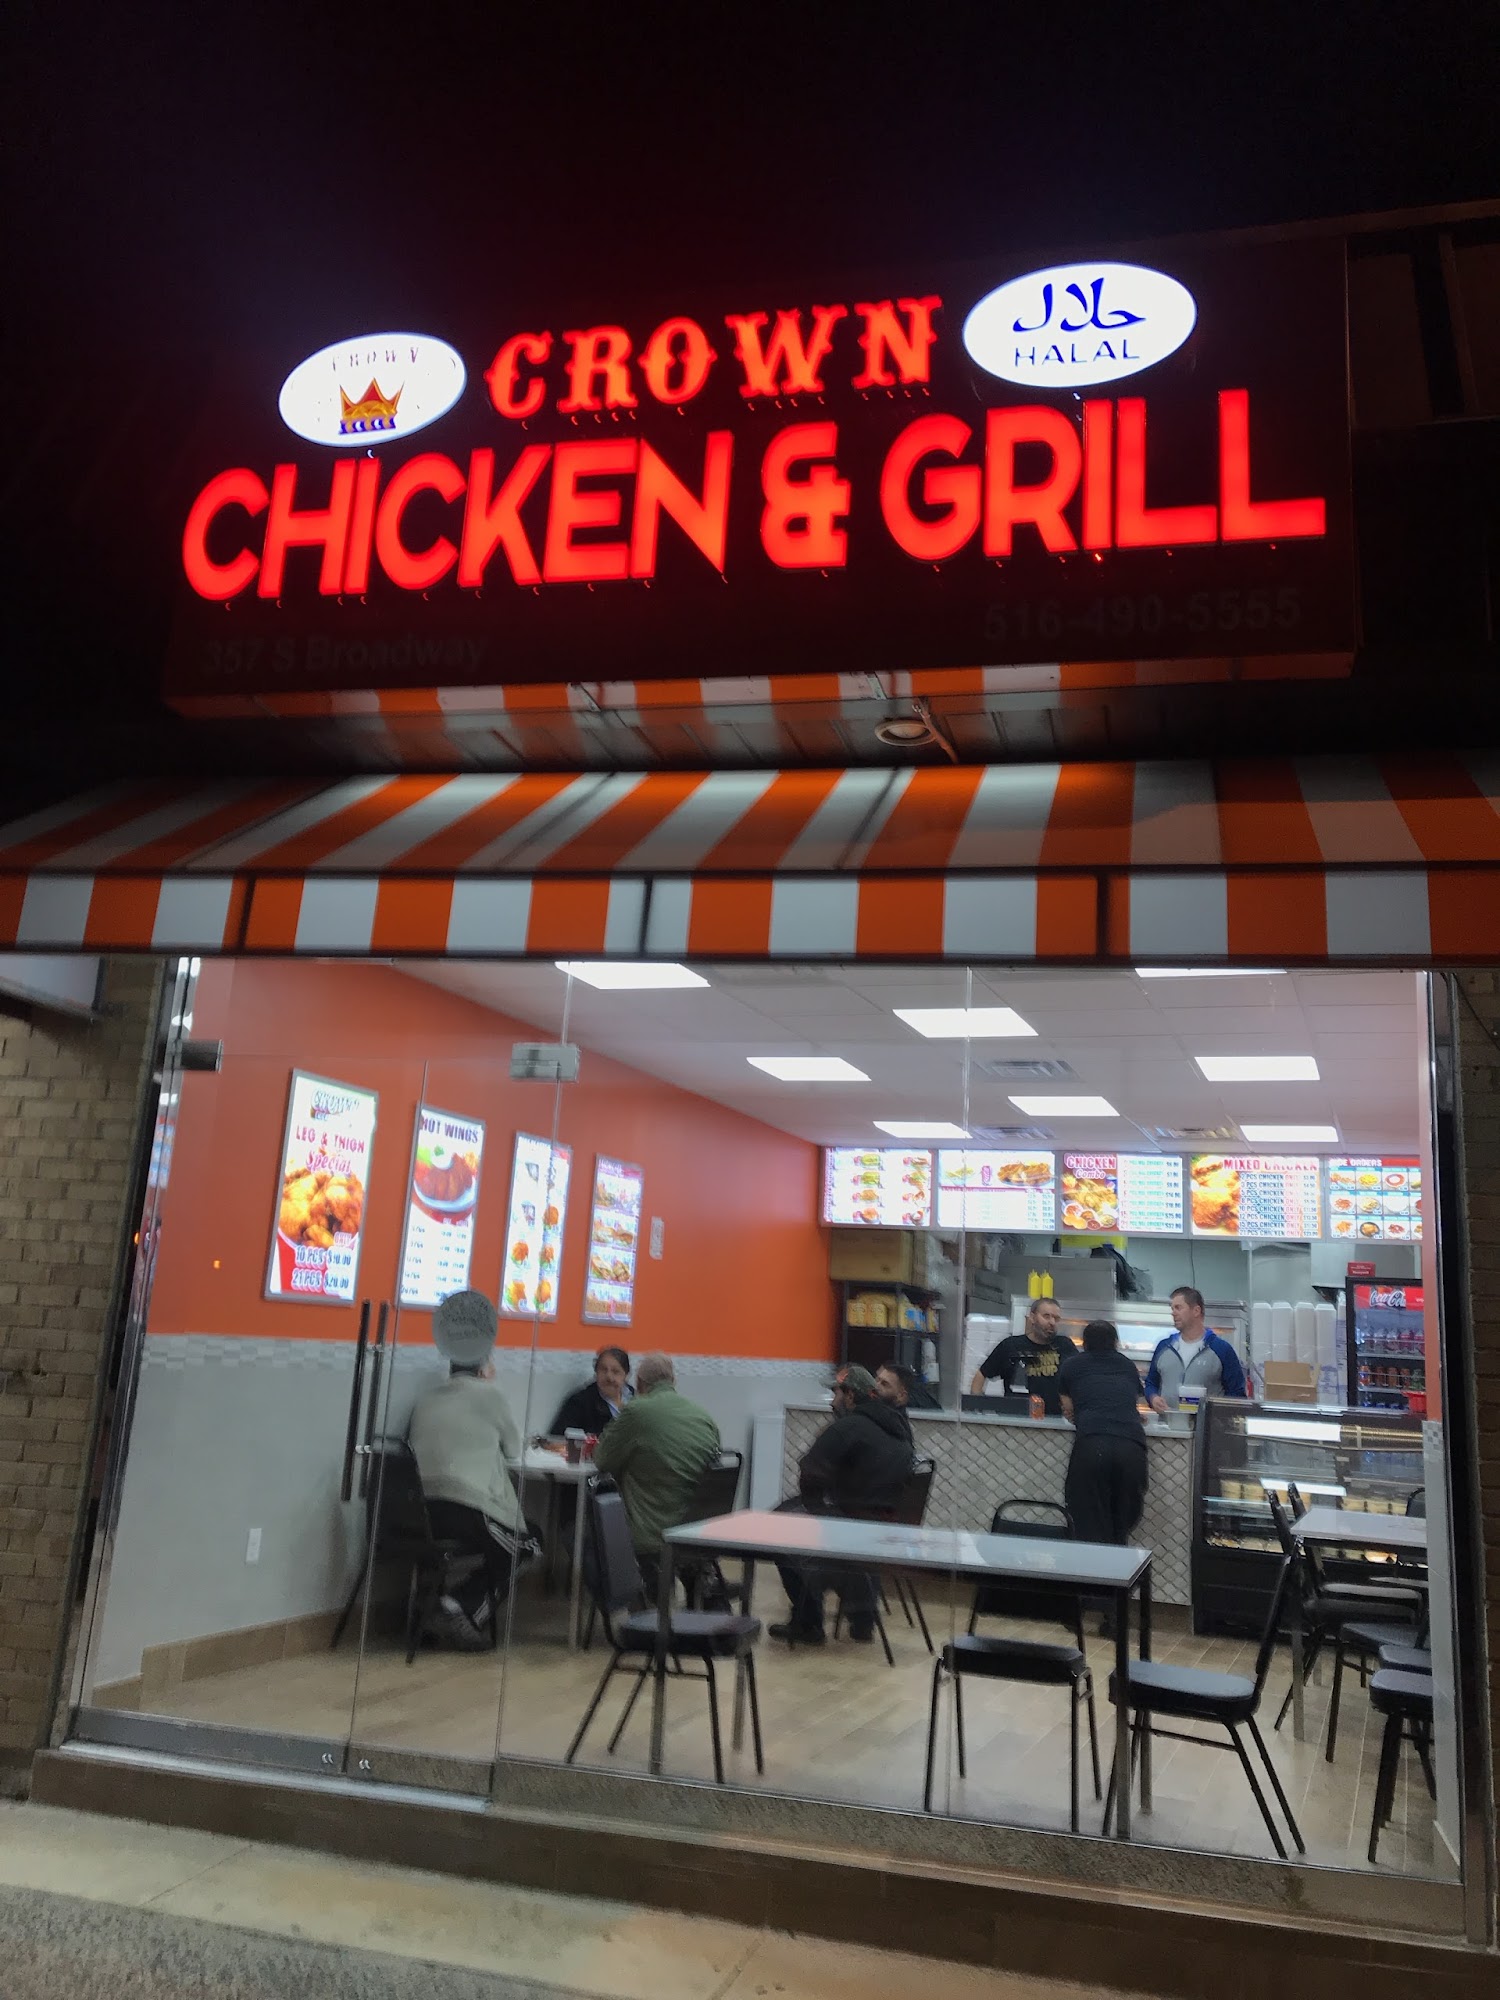 CROWN CHICKEN AND GRILL